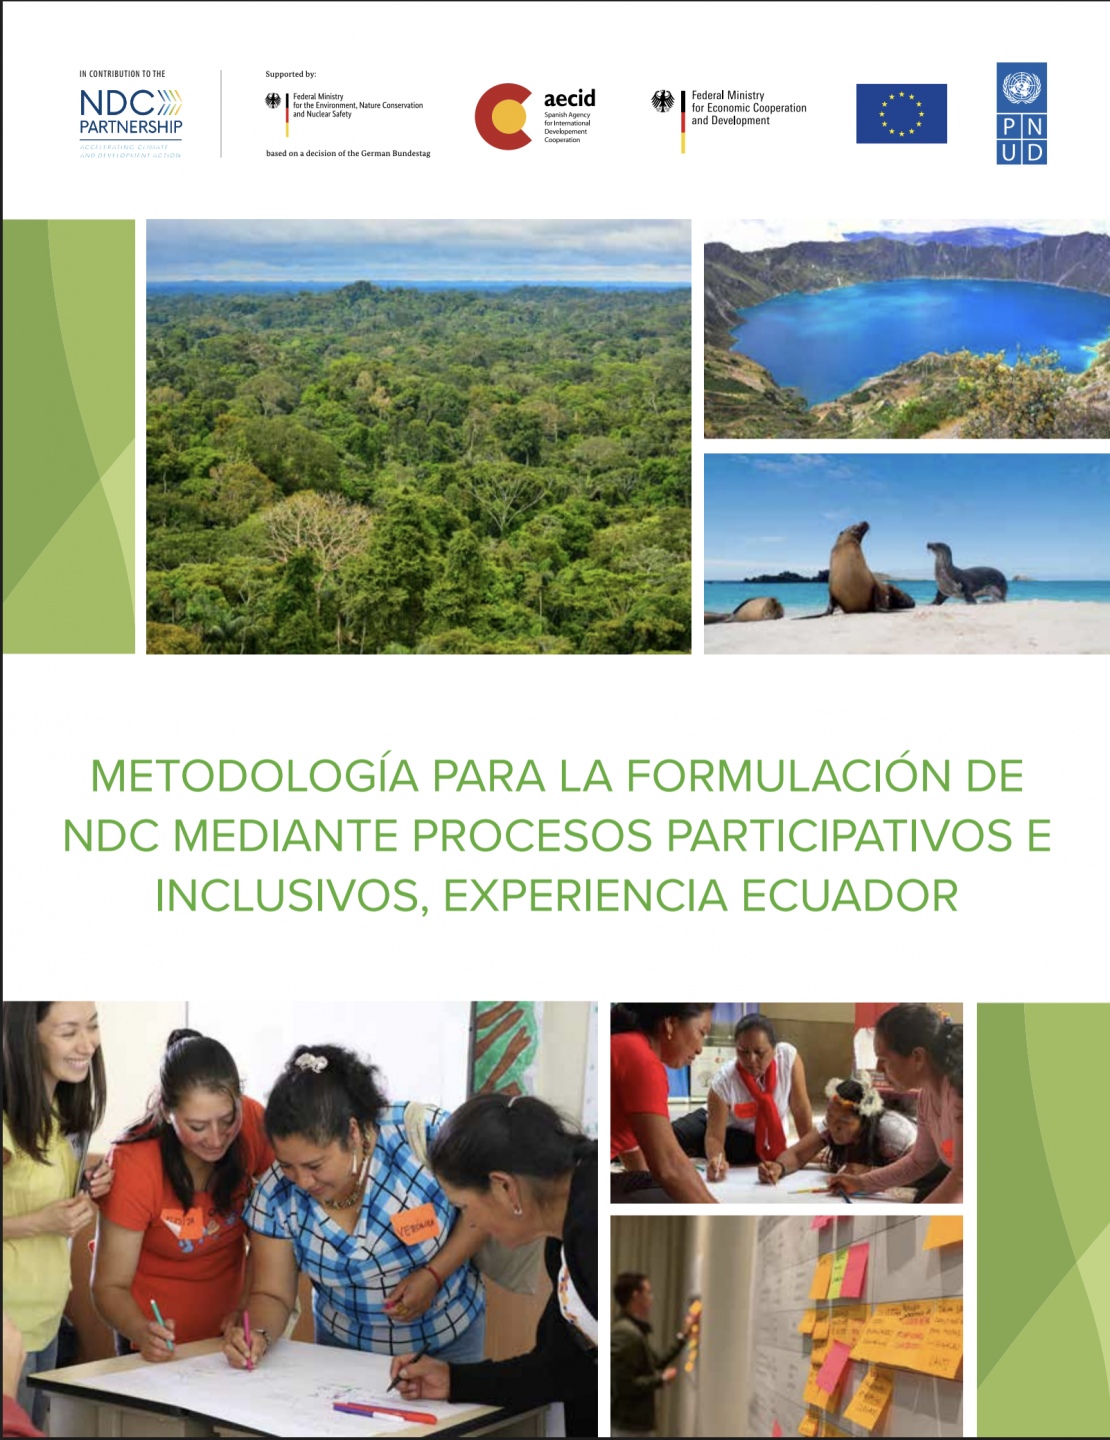 Methodology for Inclusive, Participatory NDC Processes